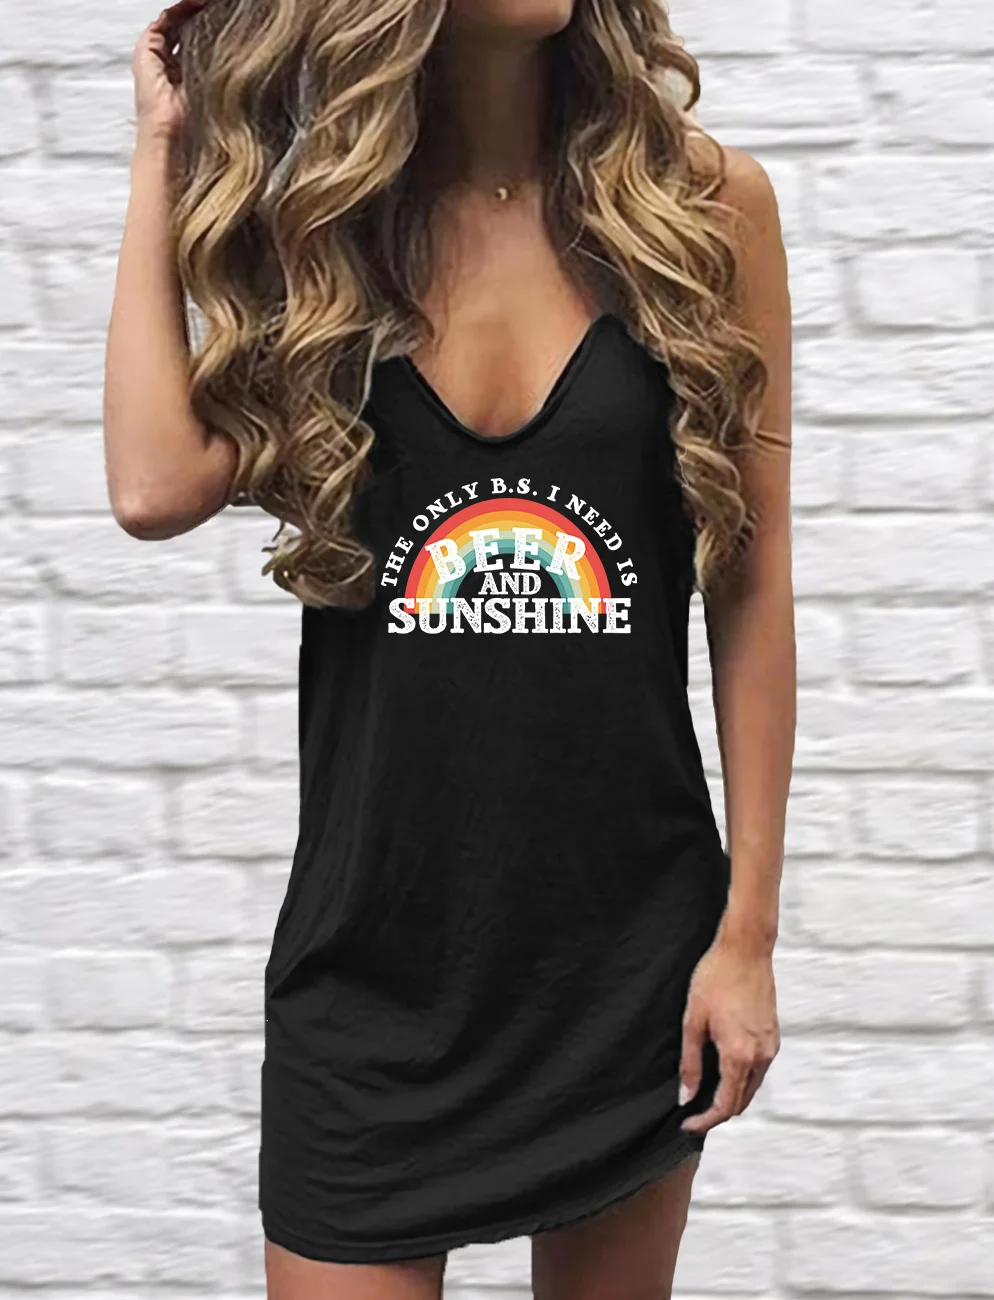 The Only B.S I Need Is Beer And Sunshine Rainbow Mini Dress